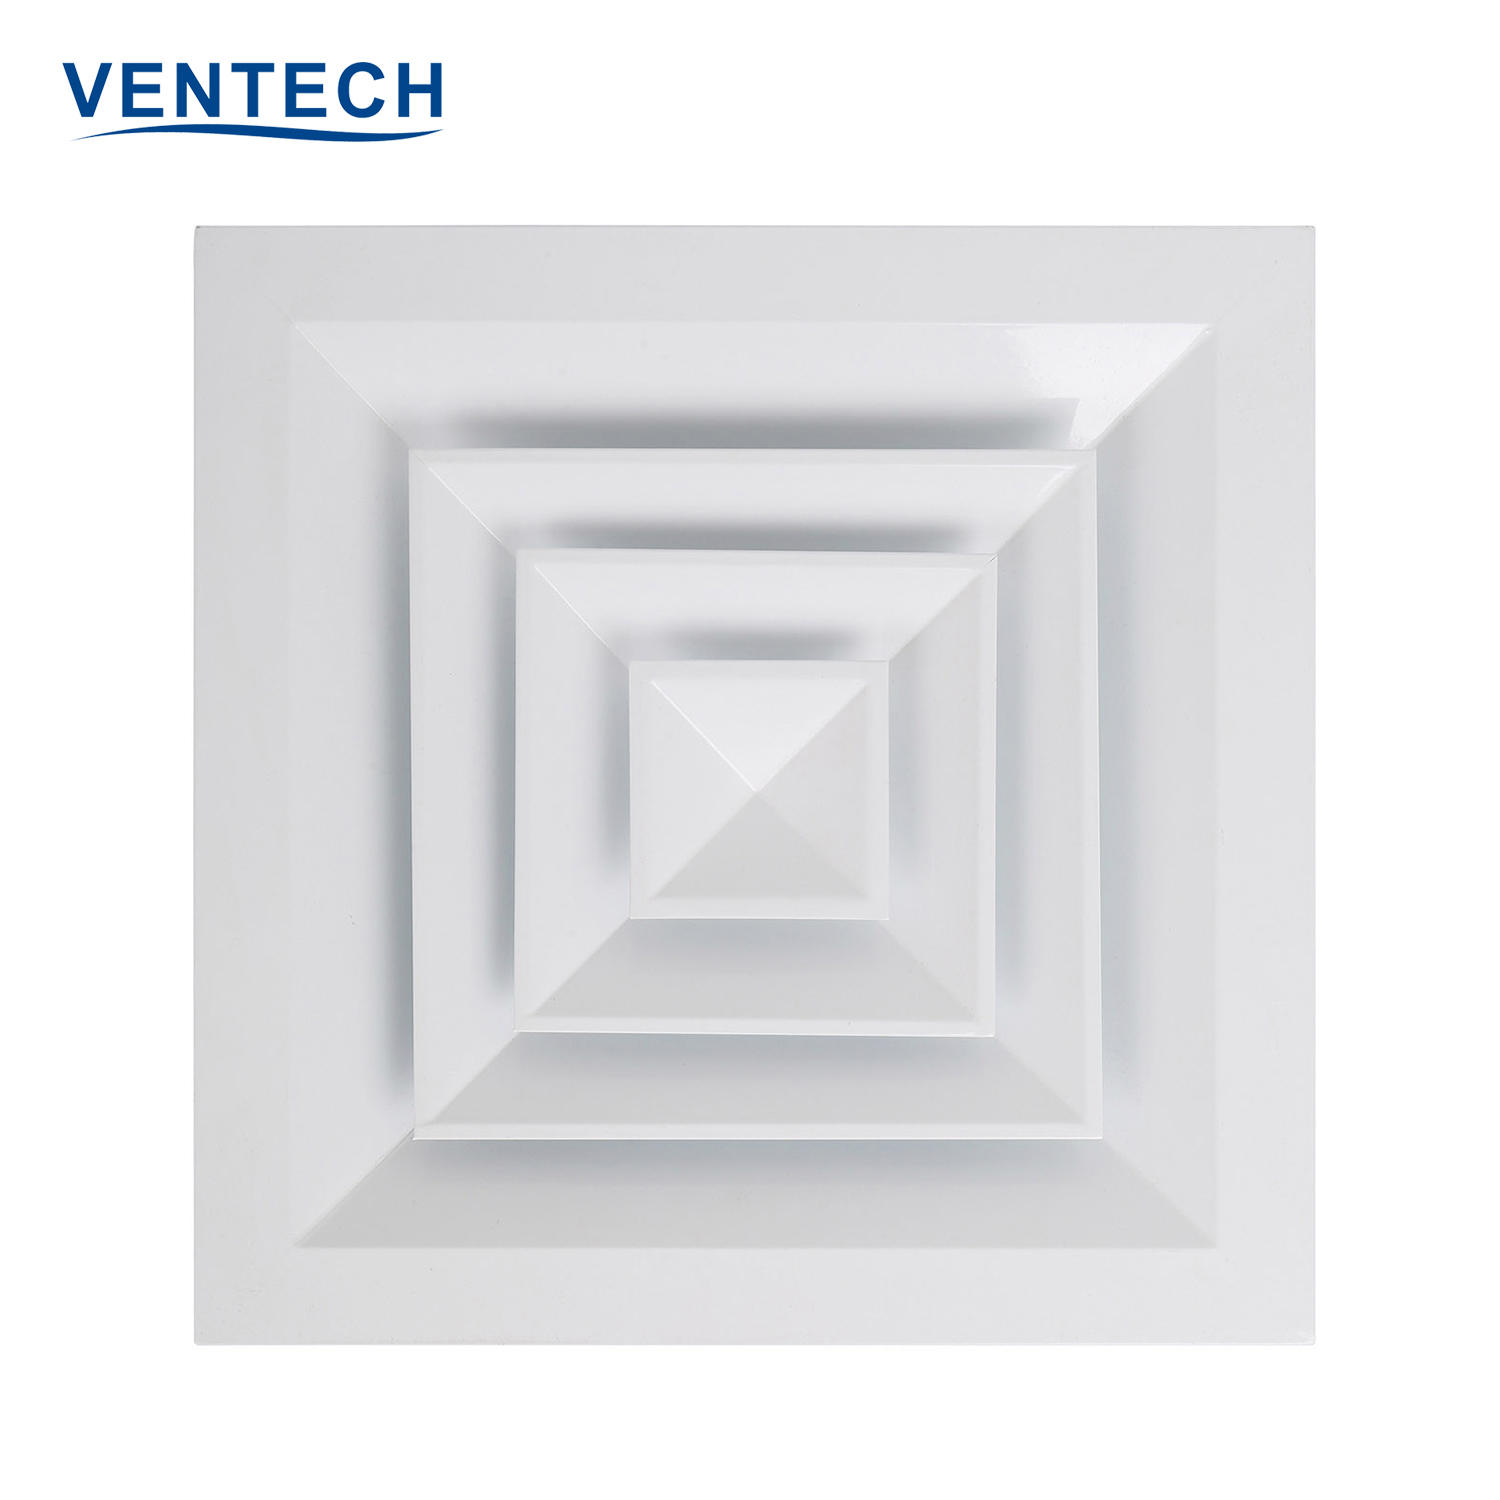 VENTECH Hvac System Aluminium Exhaust Air Outlet Conditioning Square Air Duct Ceiling Diffuser